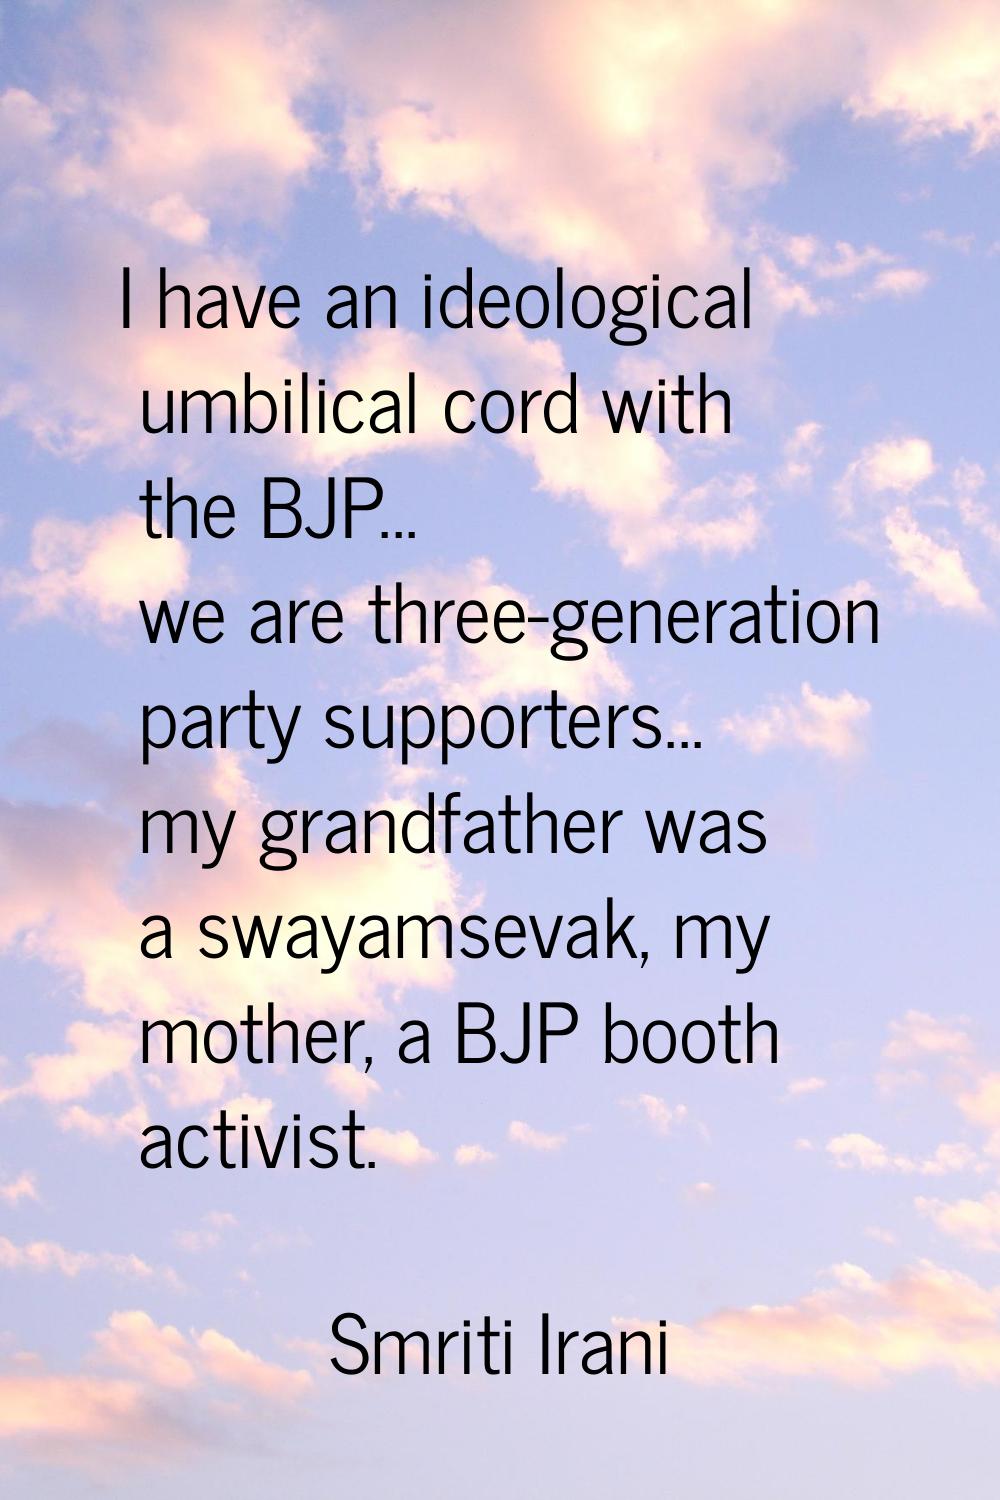 I have an ideological umbilical cord with the BJP... we are three-generation party supporters... my